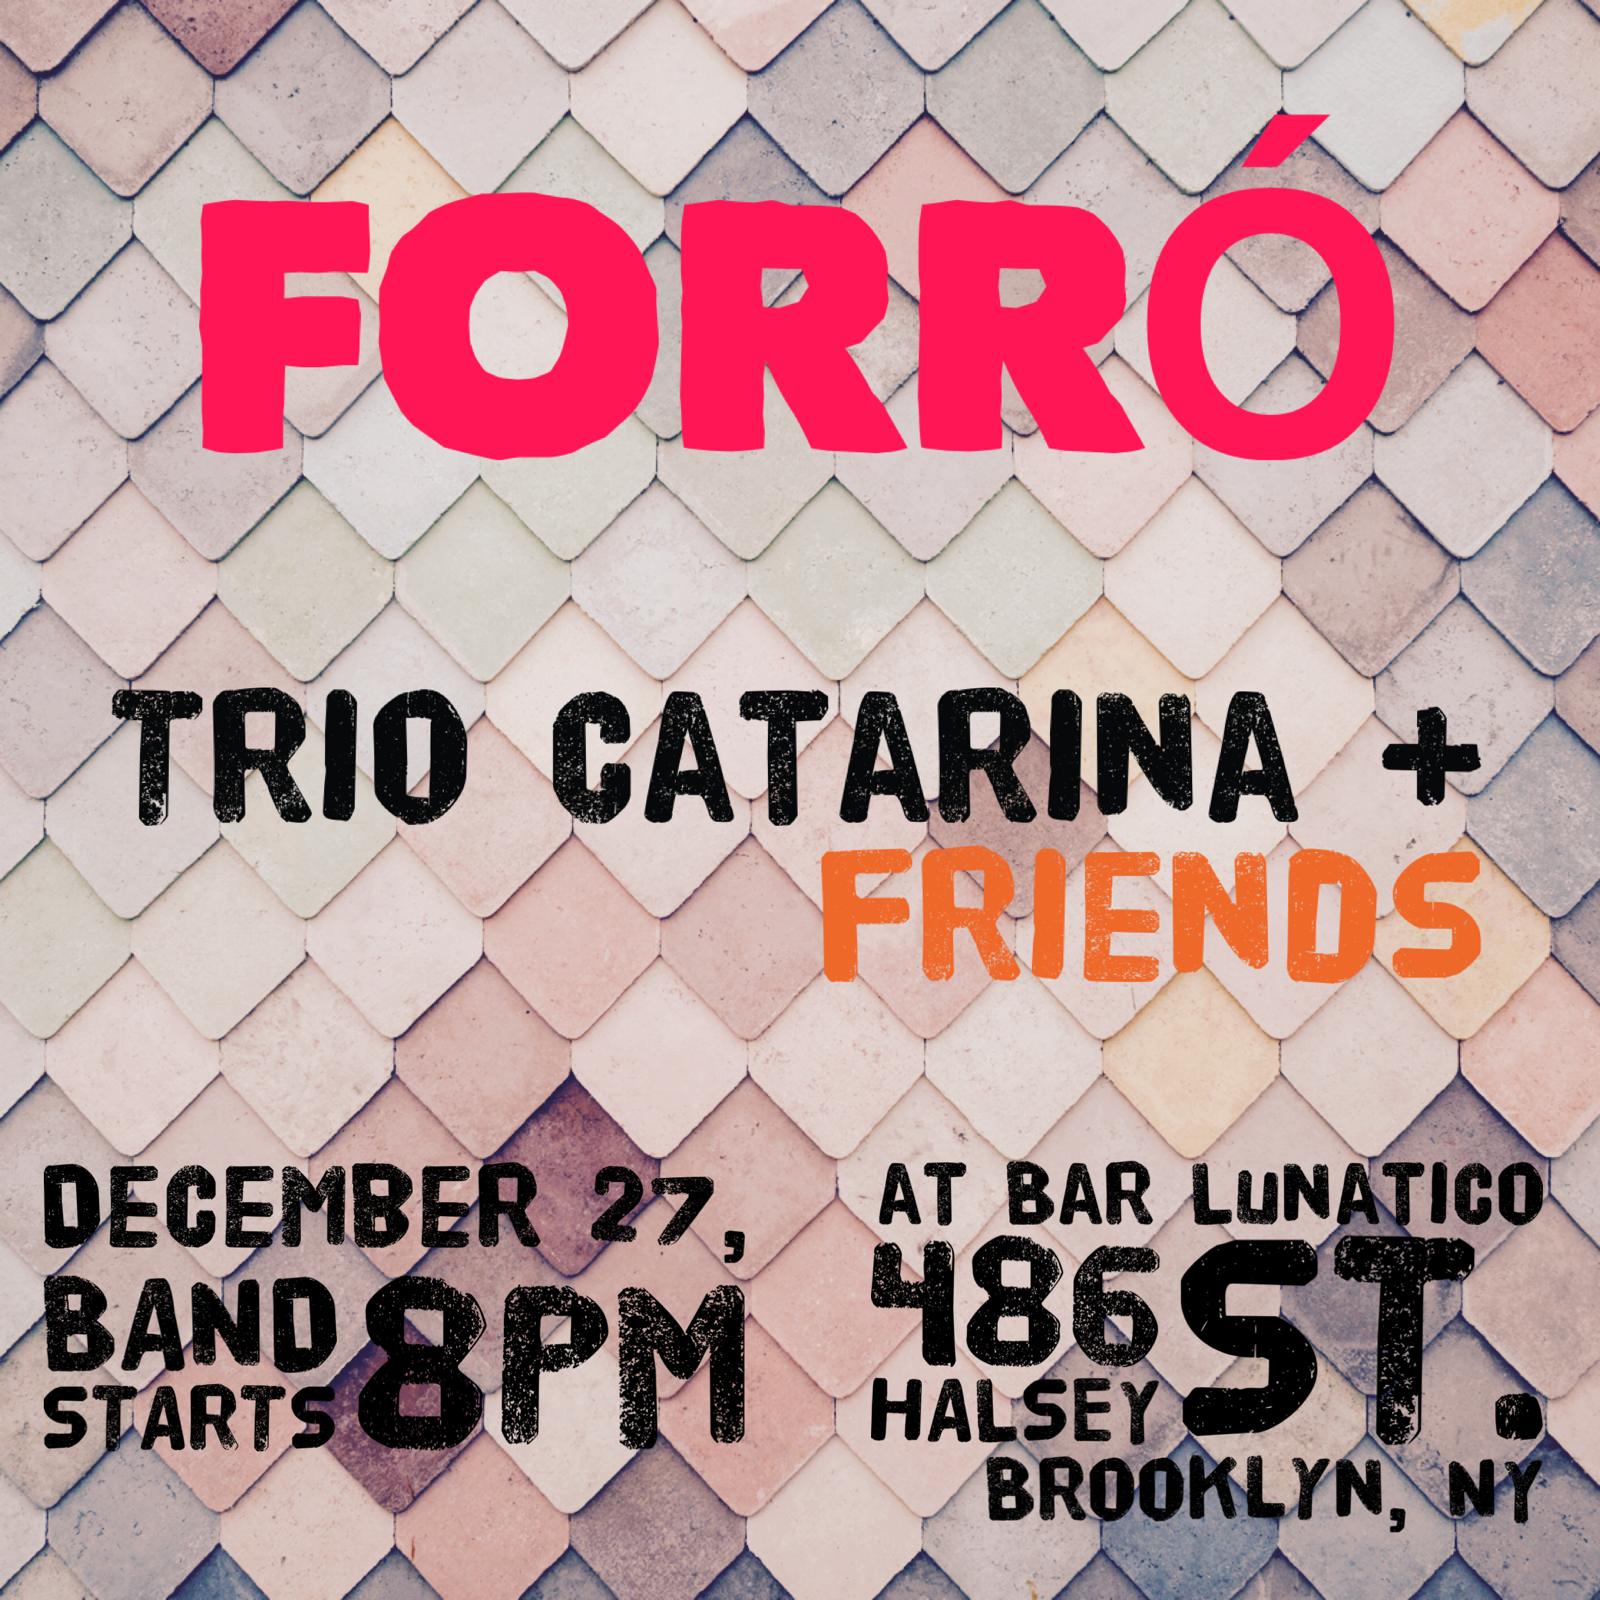 Forró with Trio Catarina and friends, Thursday Dec 27, 8PM. At bar lunatico 